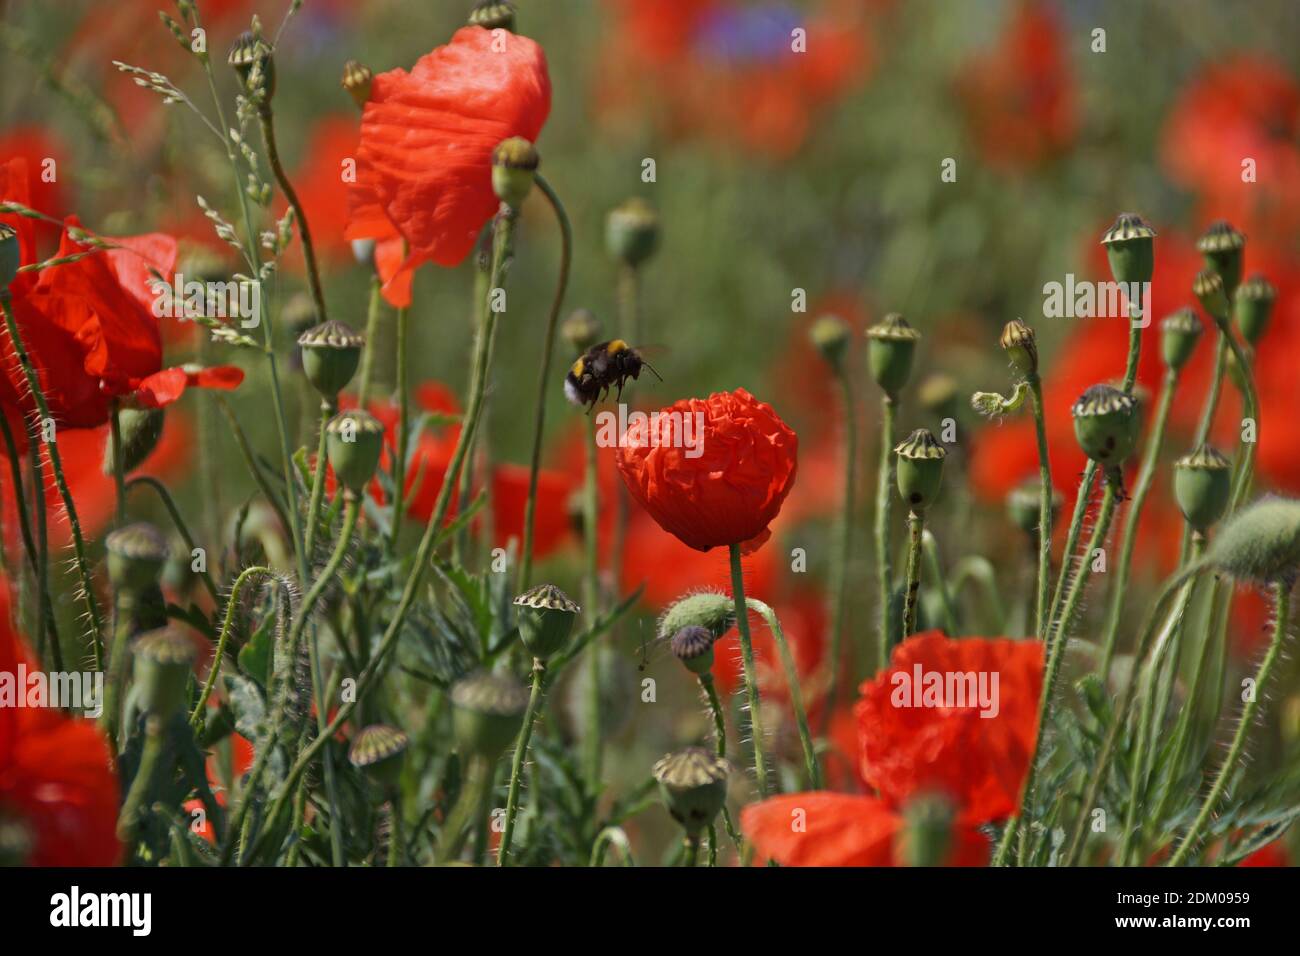 Red Poppy With A Bumble Bee Stock Photo